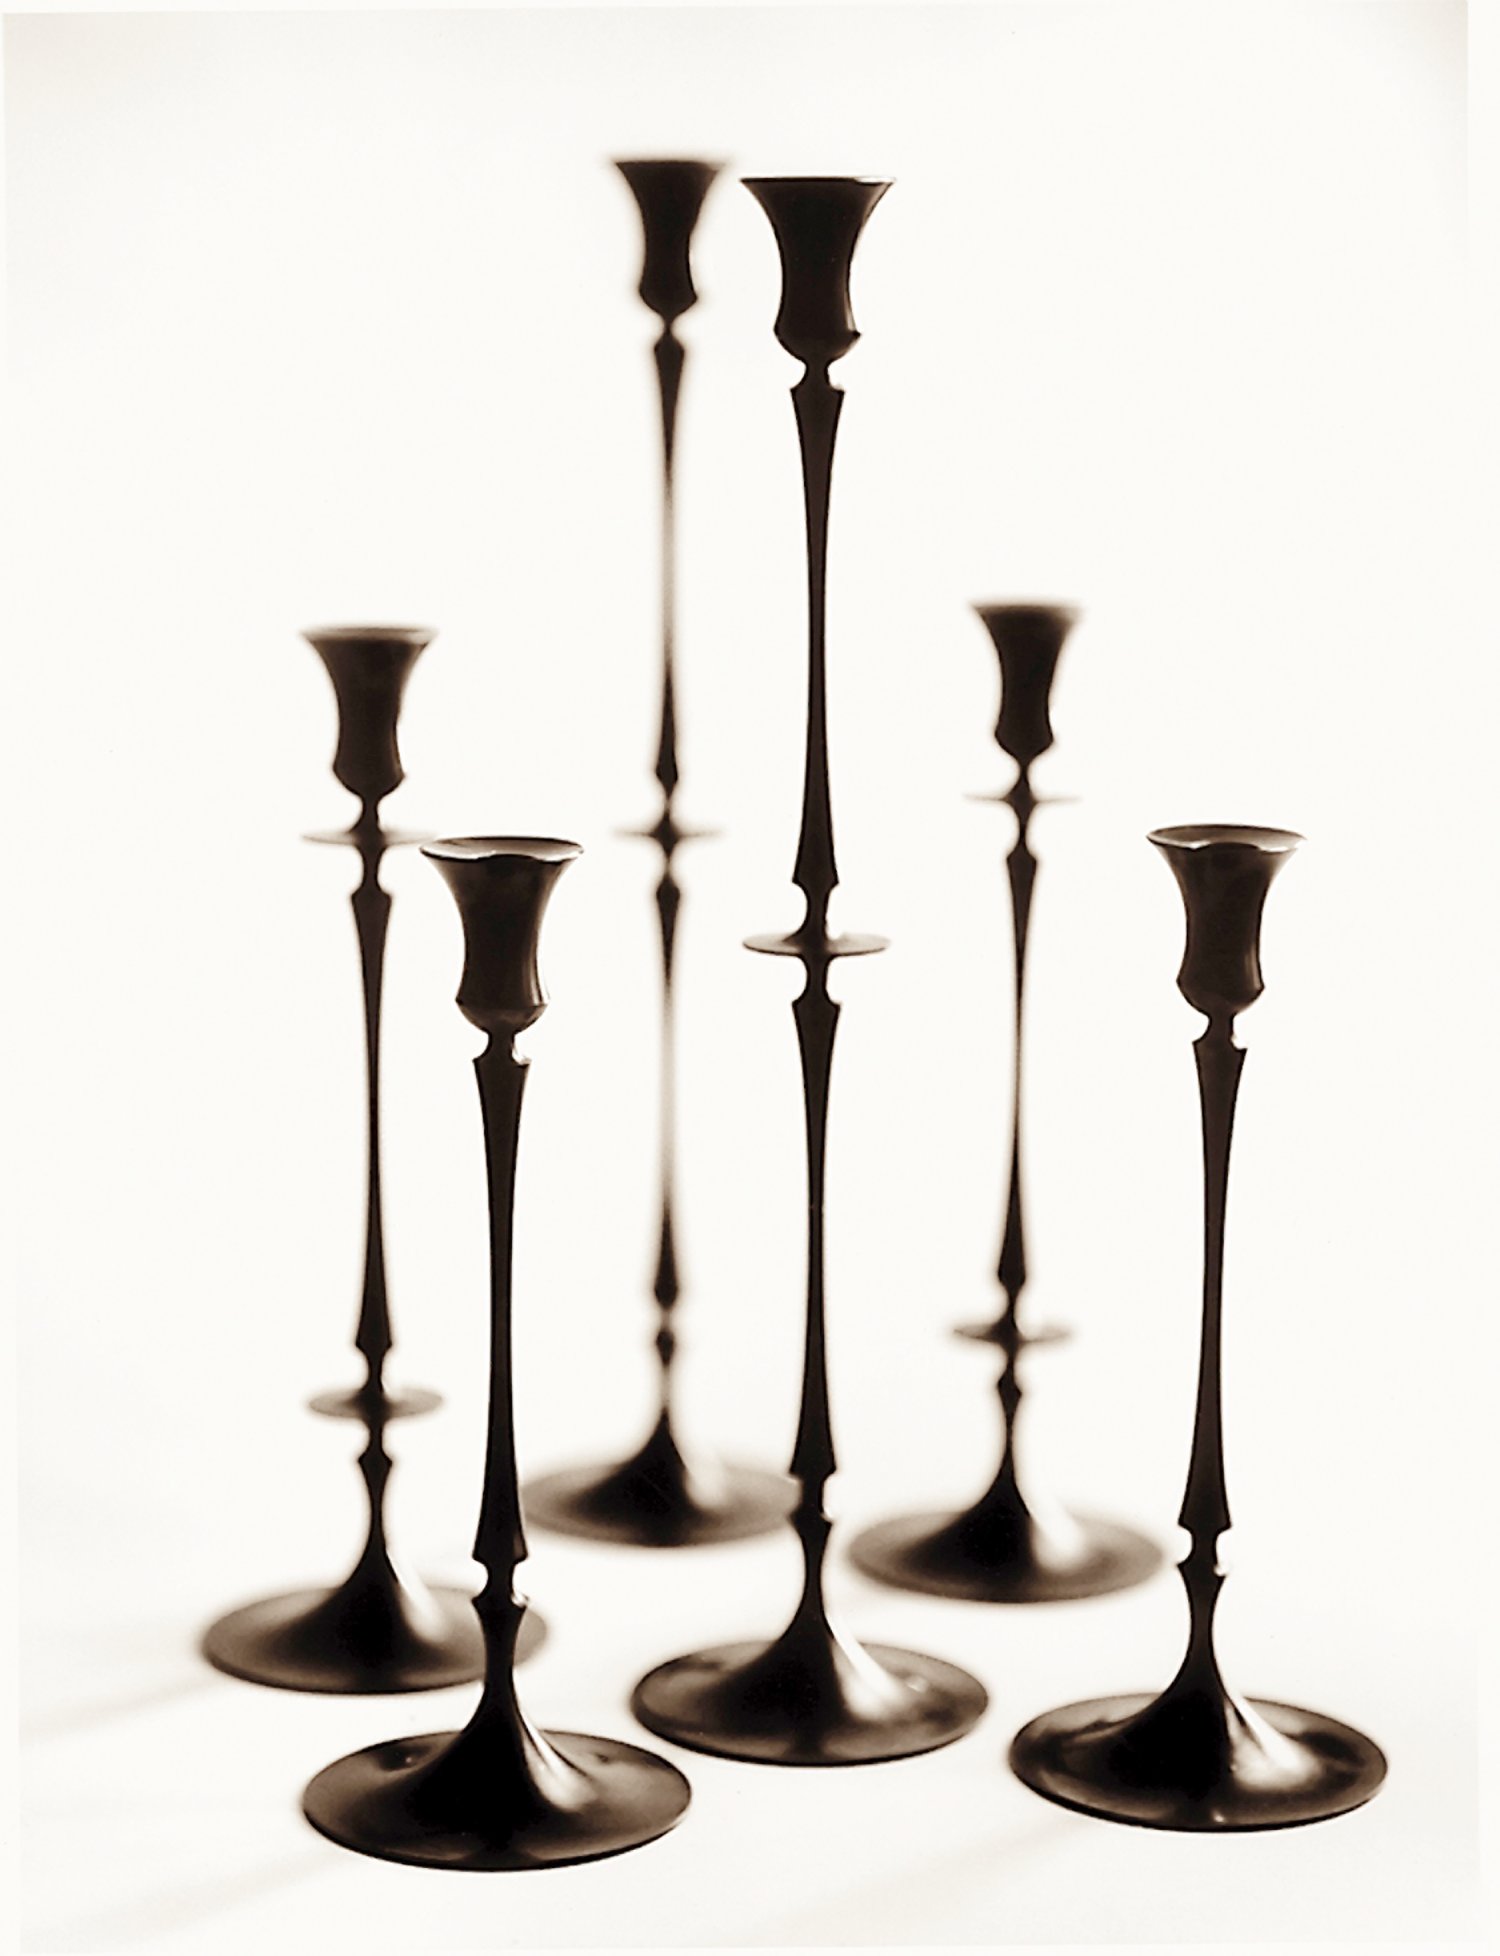 Ted Muehling Biedermeier Candlesticks, Oxidized Bronze by E.R. Butler —  Swoon